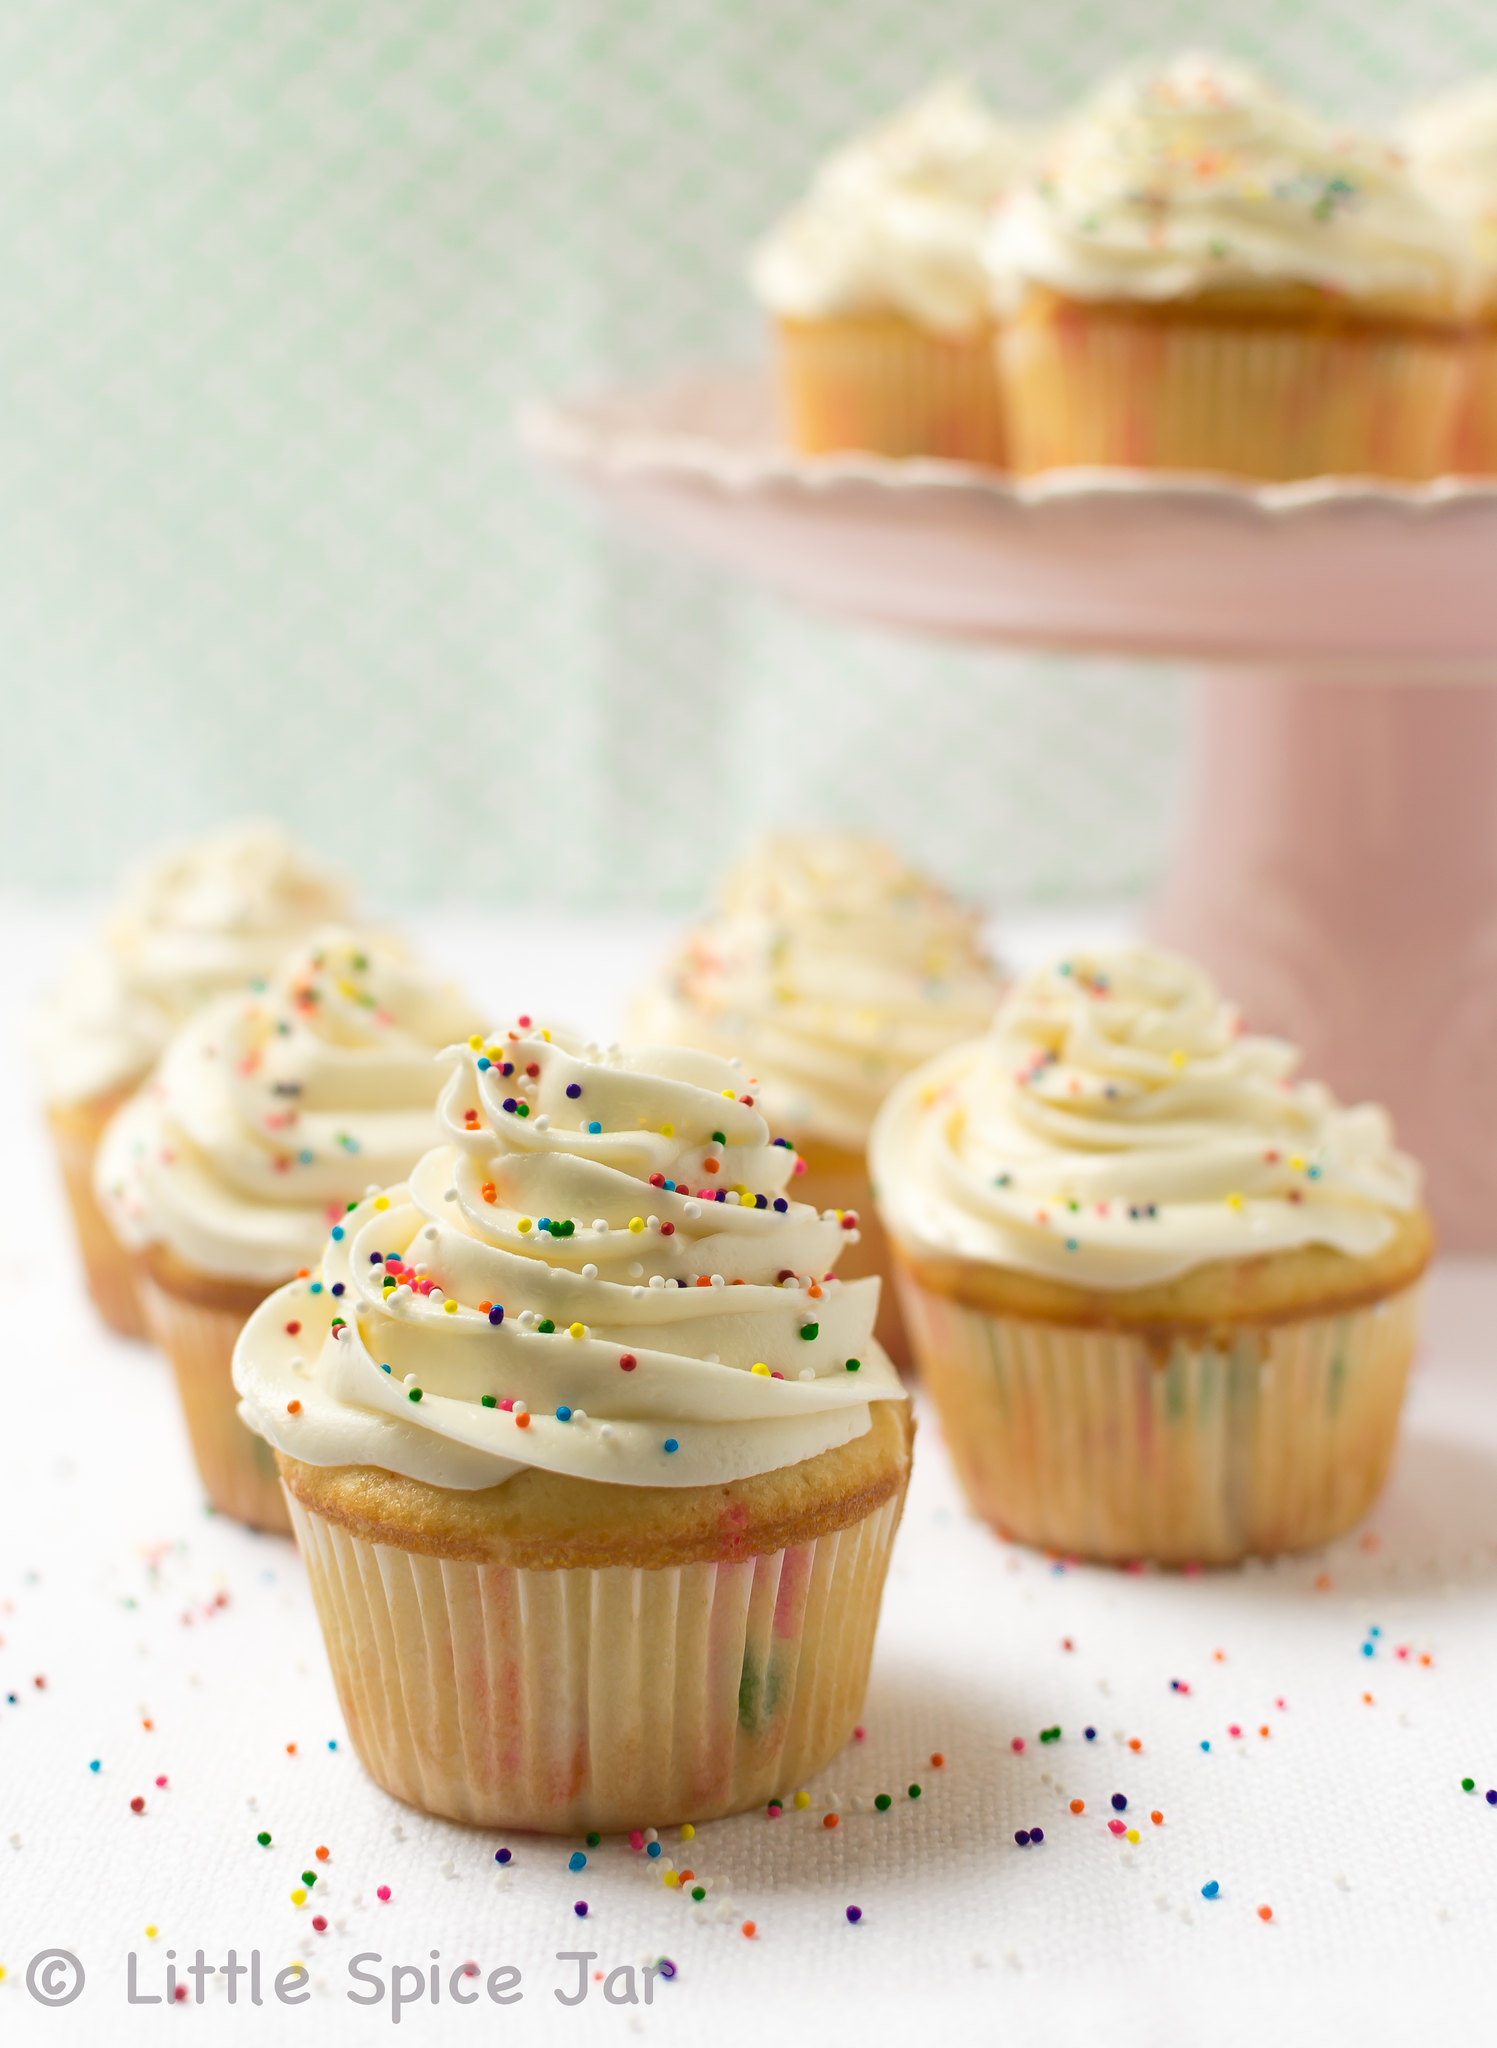 prepared funfetti cupcakes on white linen with cake stand holding more cupcakes in the back